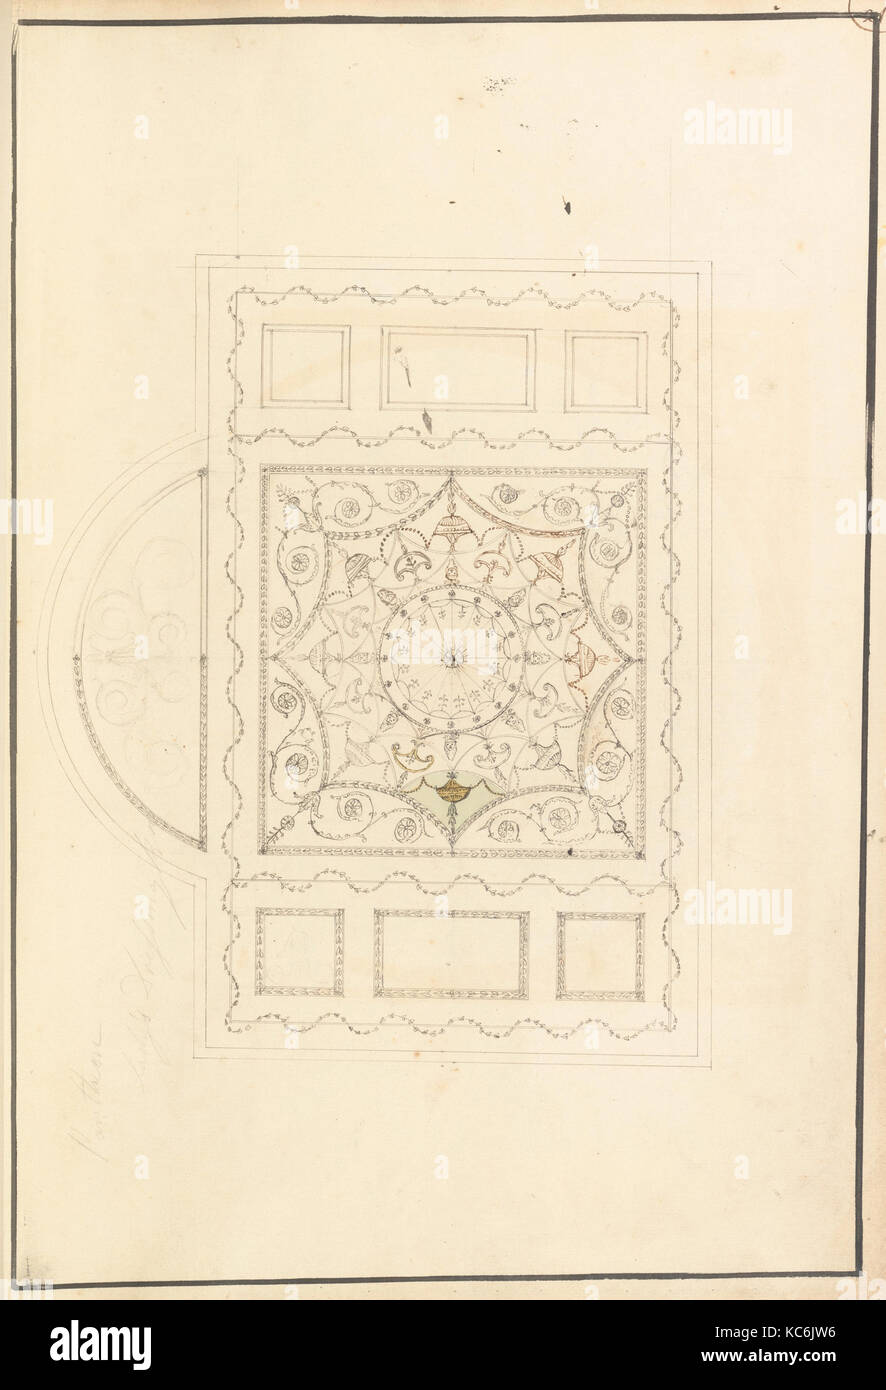 Design for Ceiling of Ladies' Dressing Room at the Pantheon, Oxford Street, London, James Wyatt, ca. 1770 Stock Photo